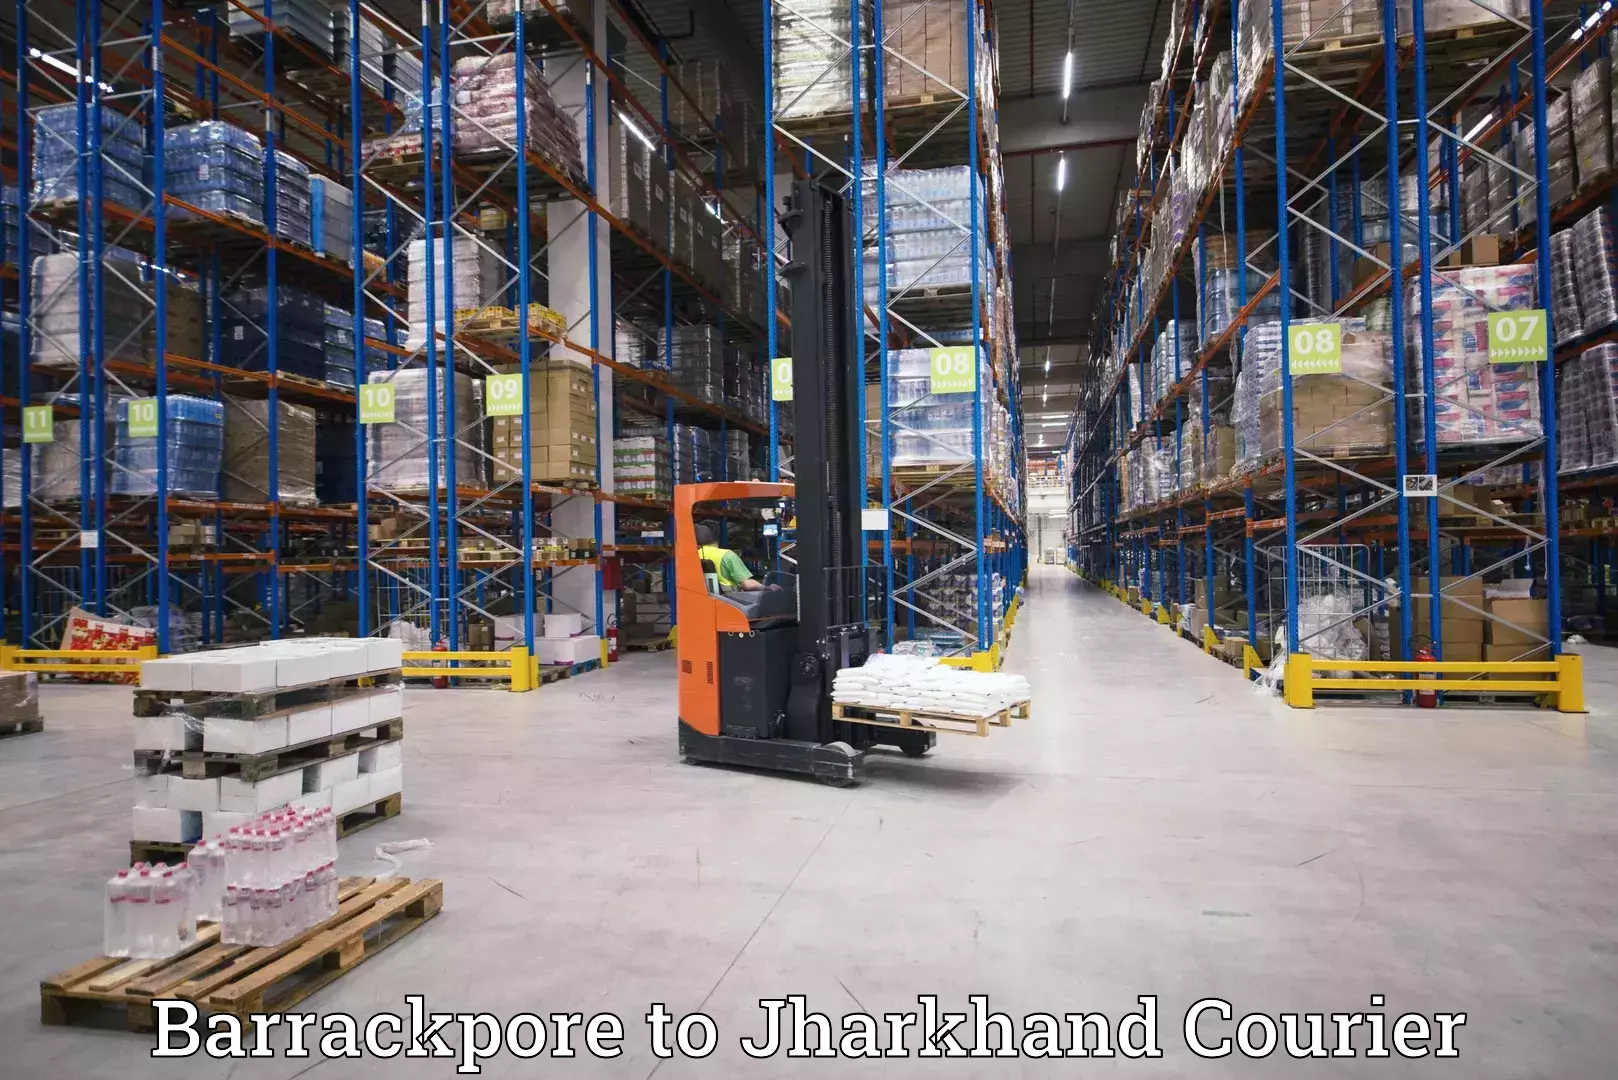 Customer-centric shipping Barrackpore to Jharkhand